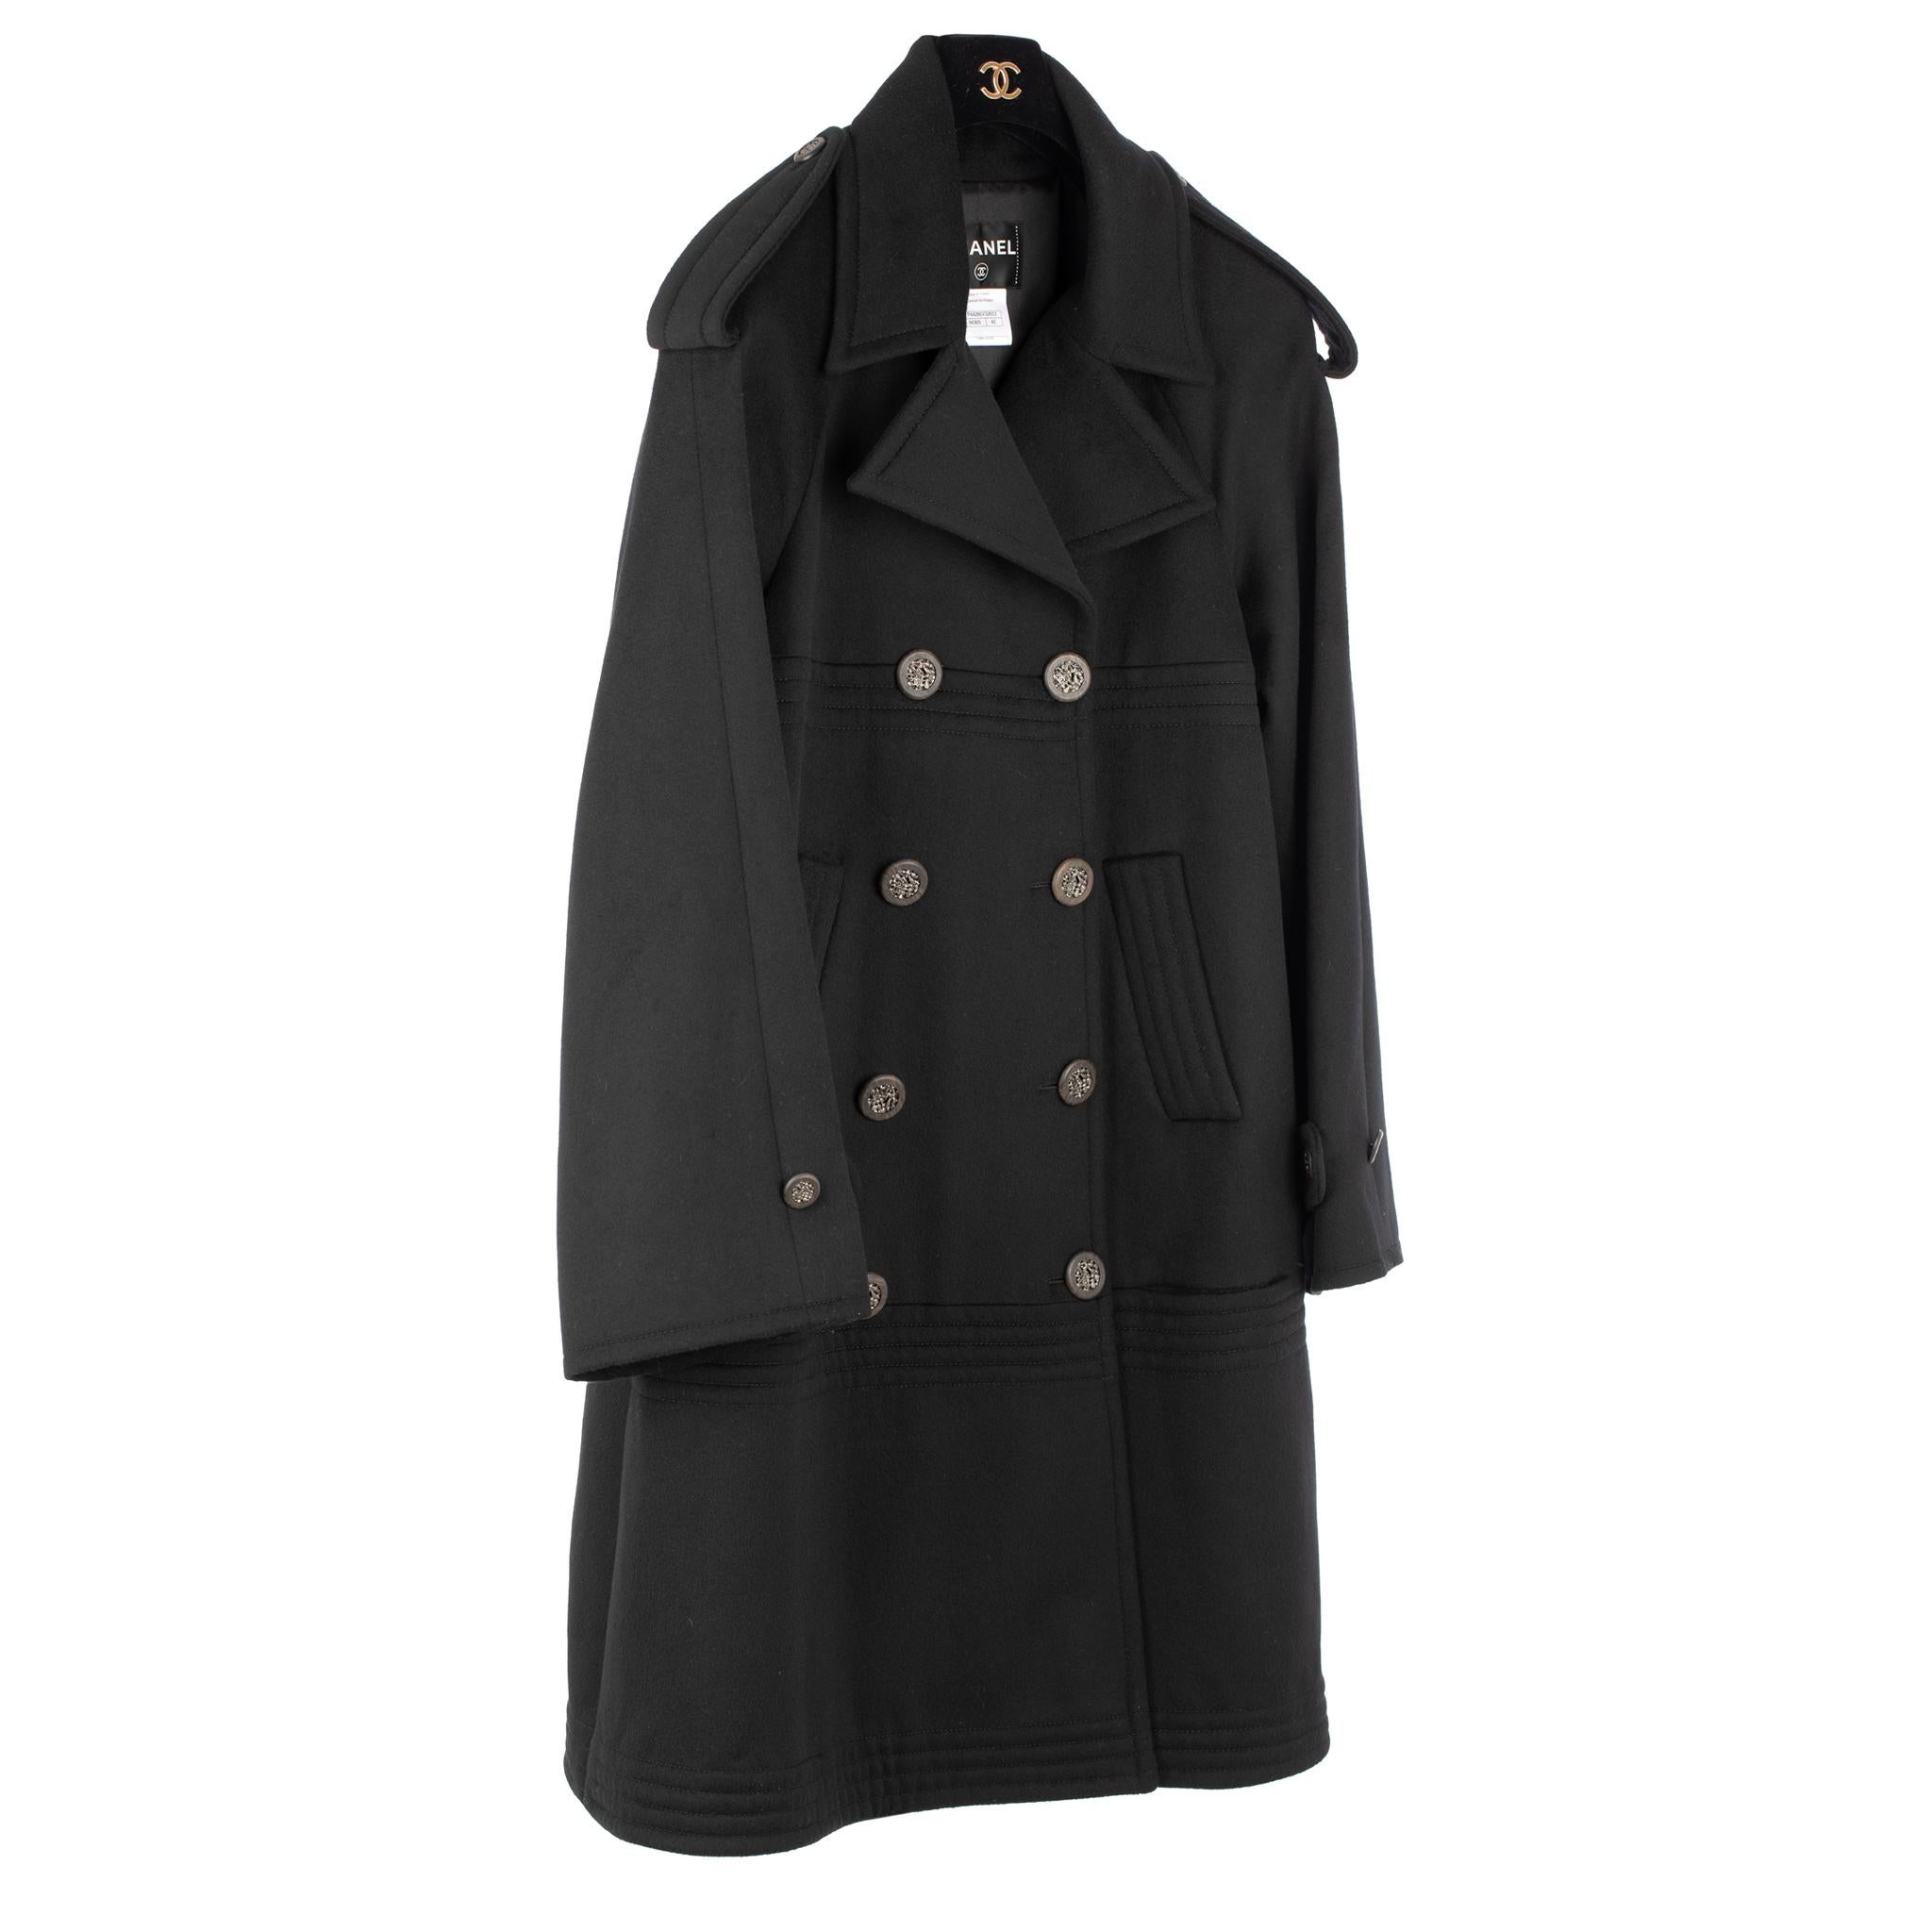 Chanel Black Jacket With Ruthenium Buttons

Brand:

Chanel

Product:

Long Black Trench Coat

Size:

42 Fr

Colour:

Black

Material:

Wool 100%

Product Code:

P44295V32653
Condition:

Preloved; Excellent

Details:

- Lining: 100% Silk

- Double